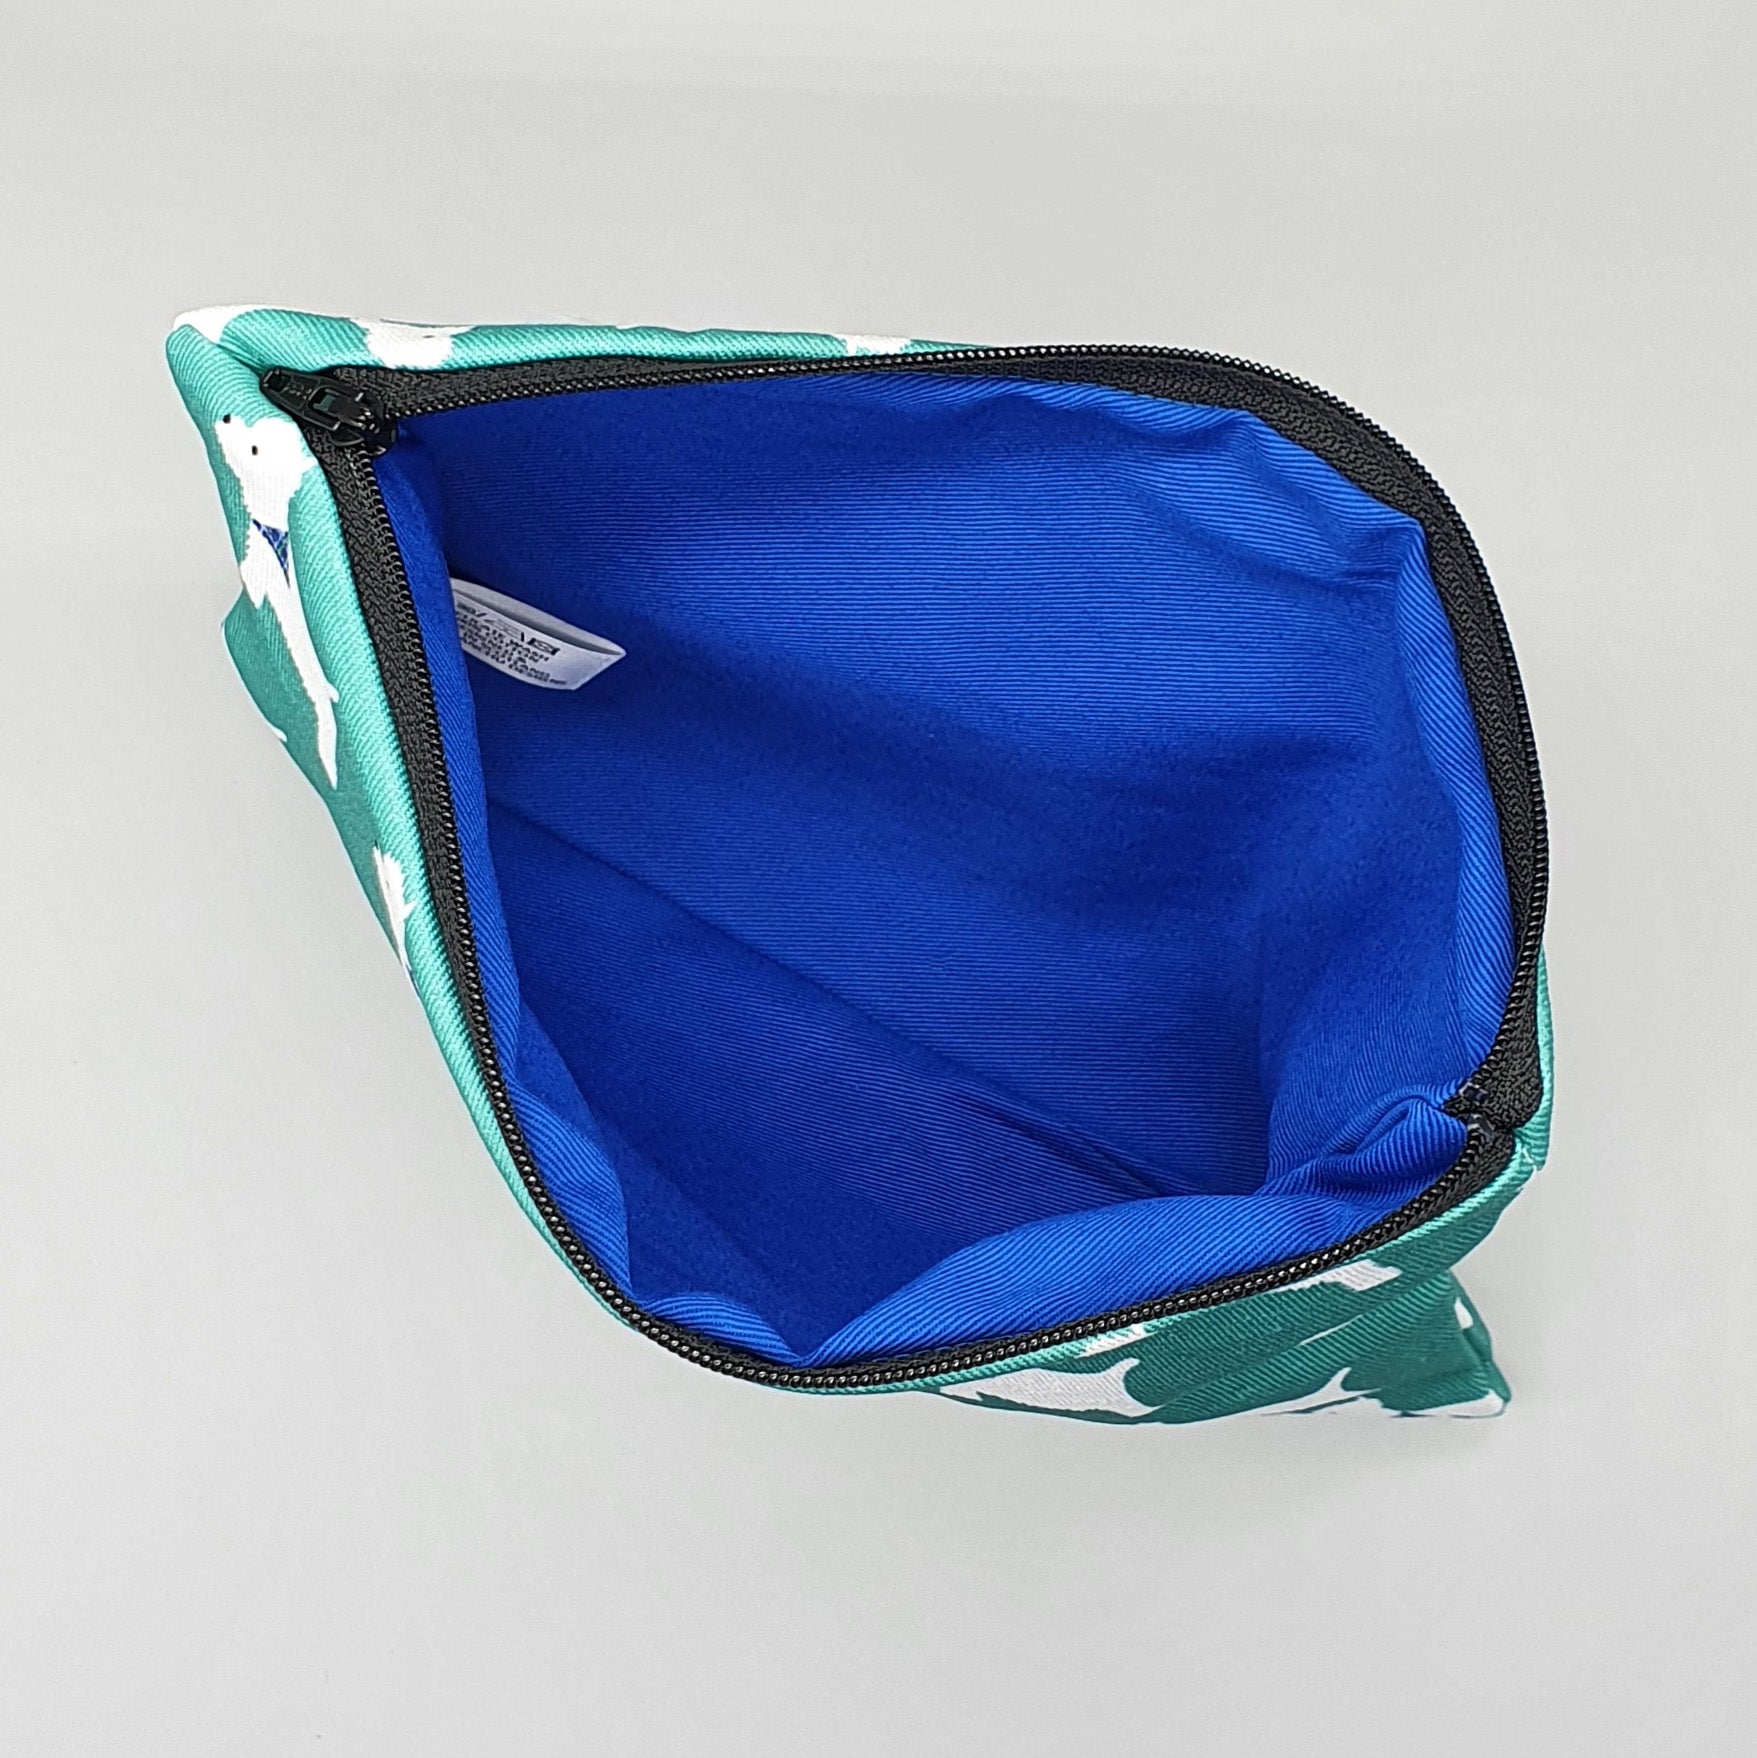 Westie accessories bag with blue interior lining